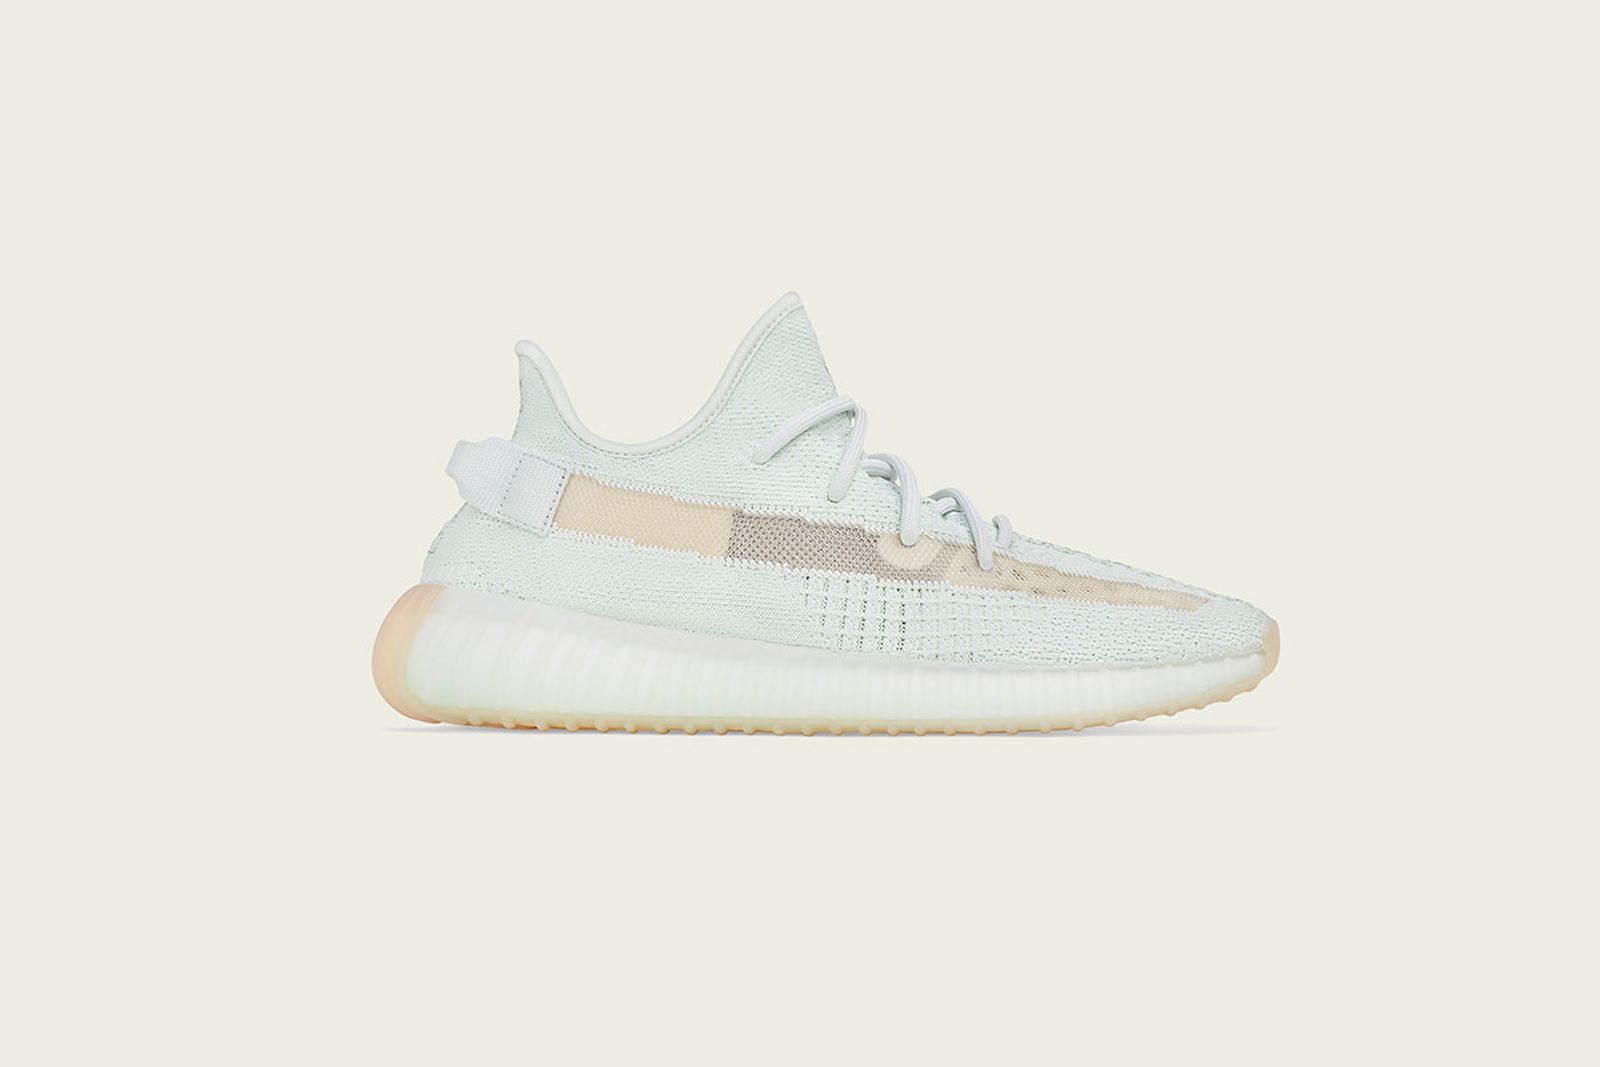 adidas YEEZY Boost 350 V2 Hyperspace: Official Look & Release Info